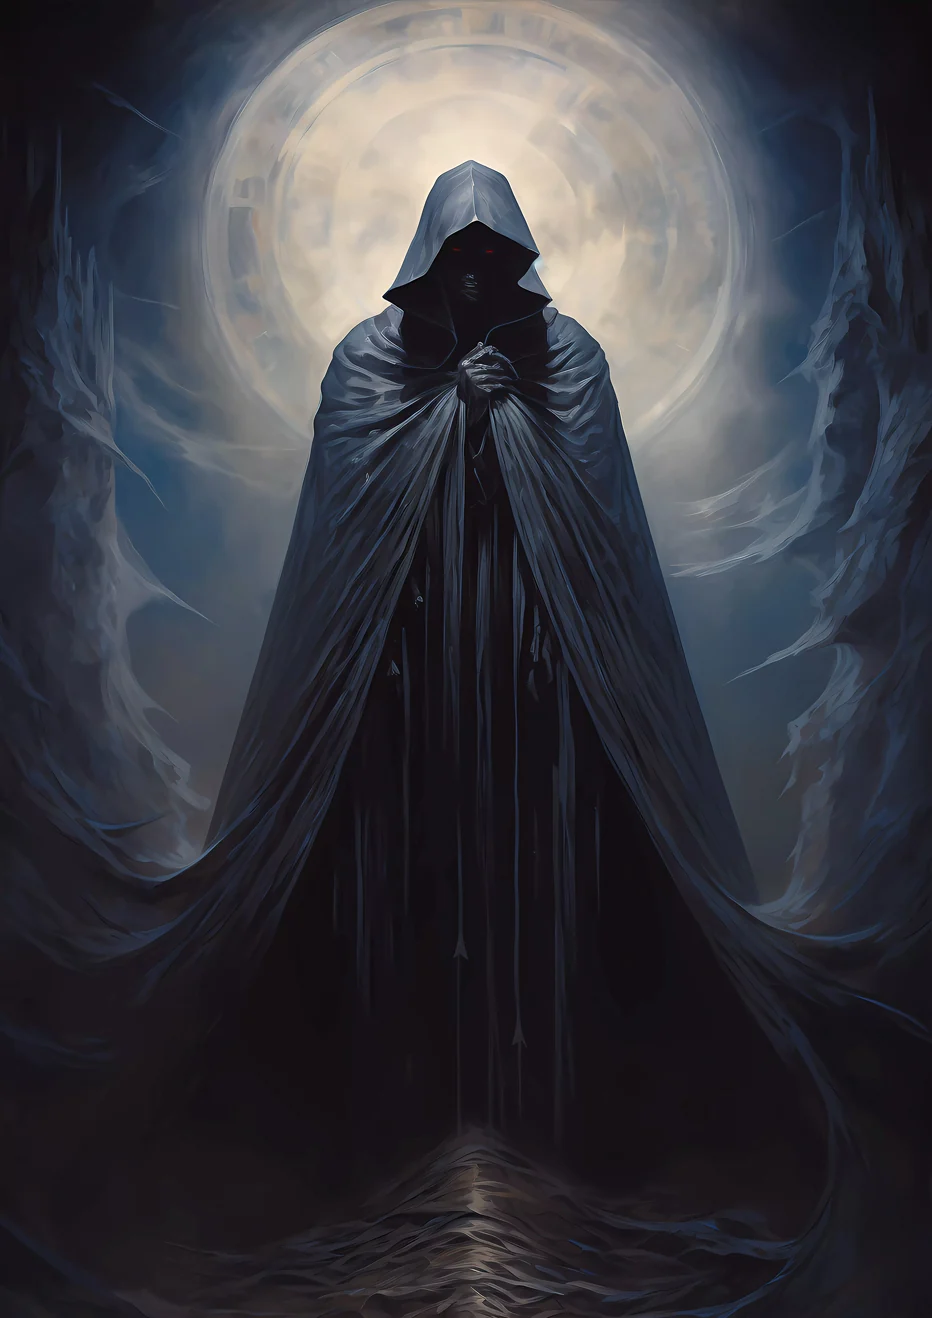 Shrouded in Shadows - Dark figure draped in a long blue cloak with glowing red eyes stands amidst a mysterious night scene.